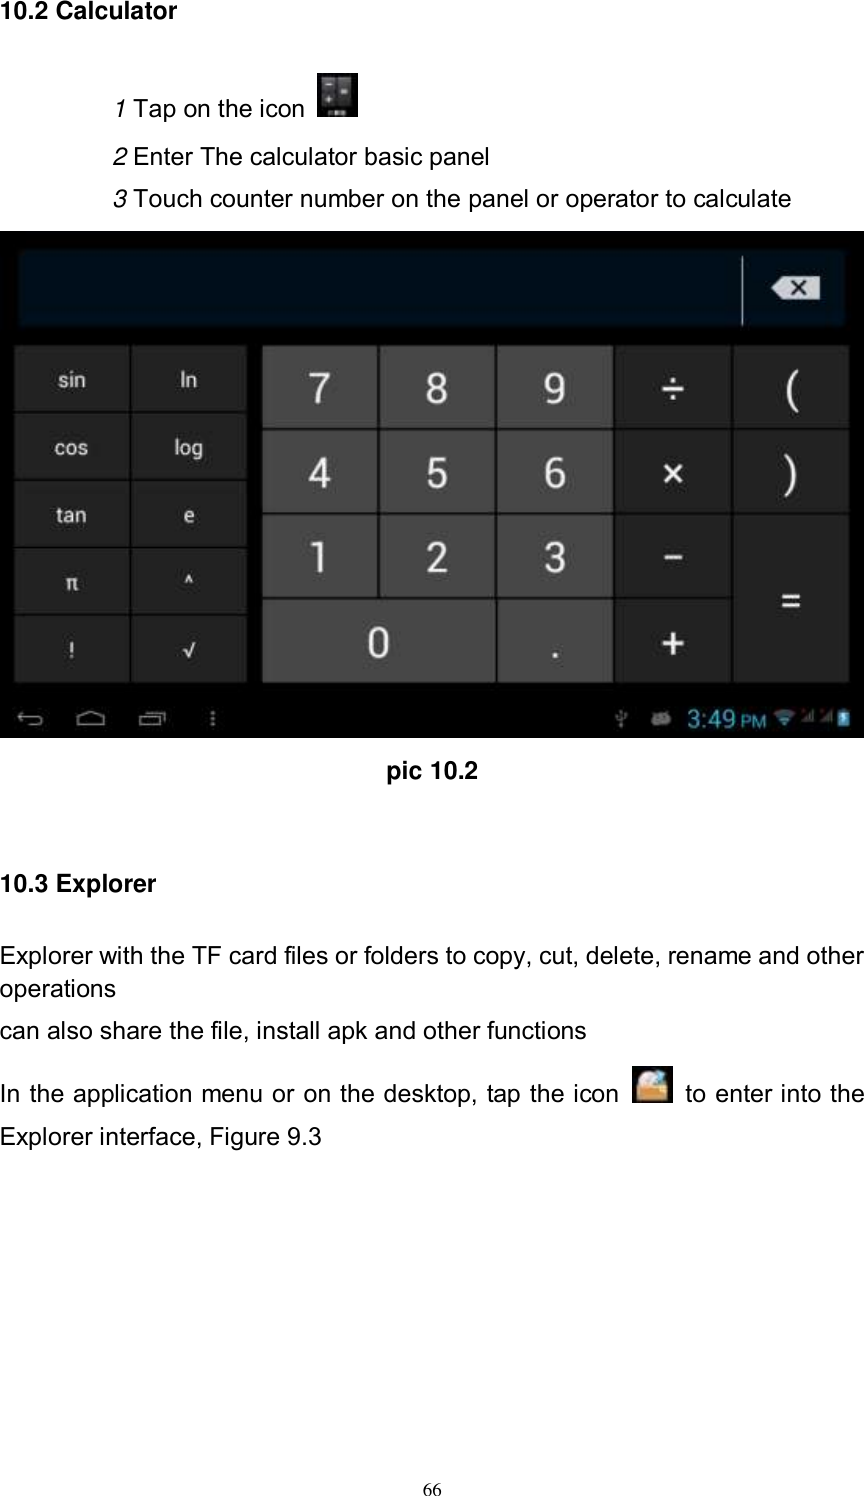      66 10.2 Calculator 1 Tap on the icon   2 Enter The calculator basic panel   3 Touch counter number on the panel or operator to calculate  pic 10.2  10.3 Explorer Explorer with the TF card files or folders to copy, cut, delete, rename and other operations can also share the file, install apk and other functions In the application menu or on the desktop, tap the icon    to enter into the Explorer interface, Figure 9.3  